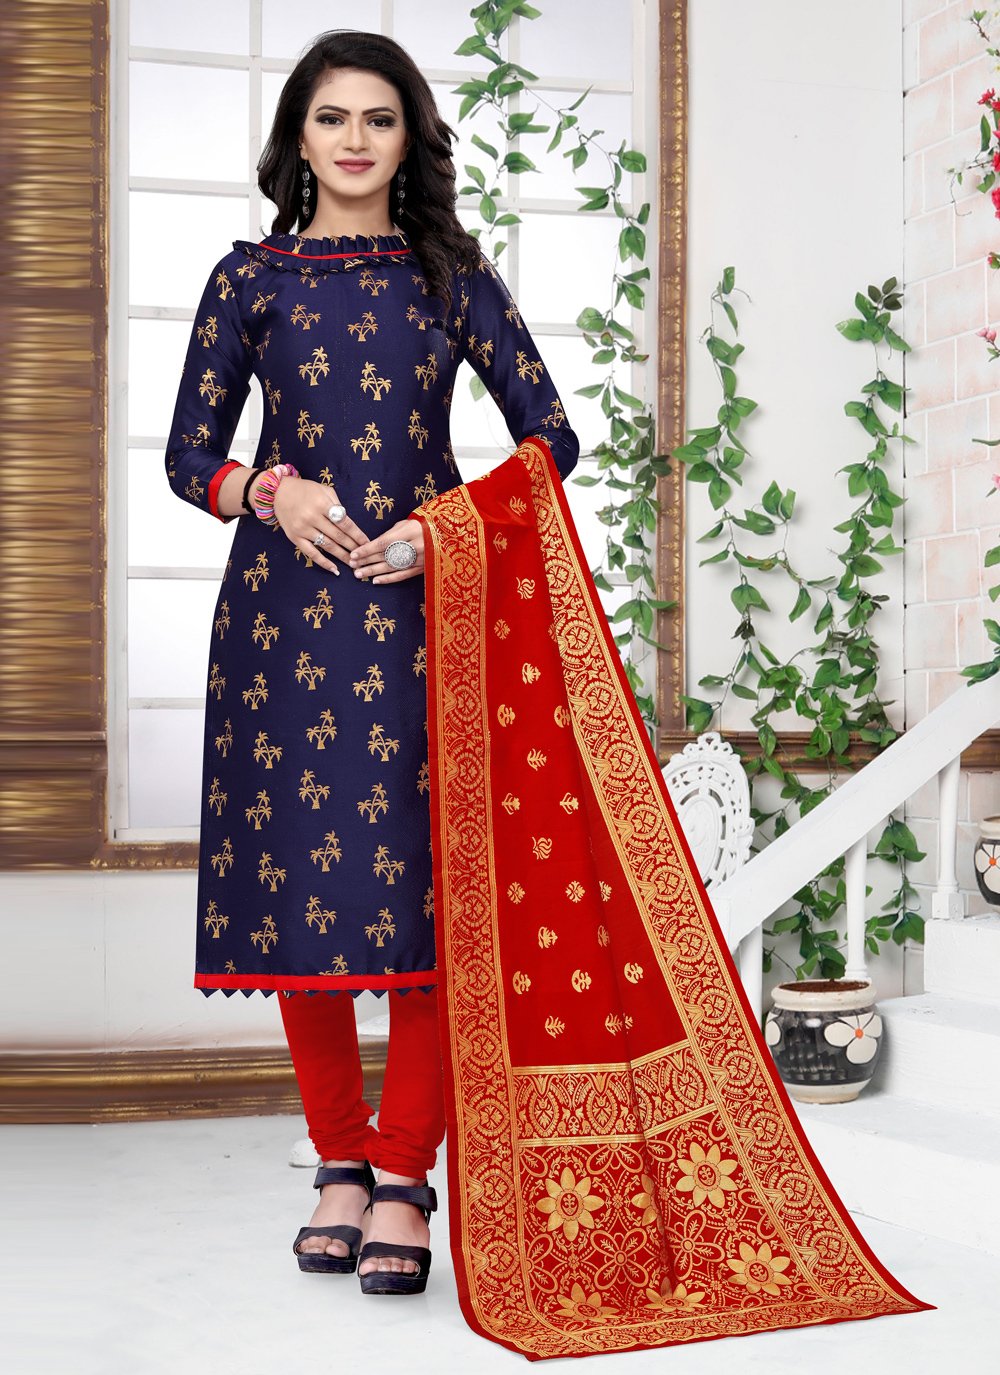 Buy Pakistani Dresses Online | Latest Collection | Free Shipping Worldwide